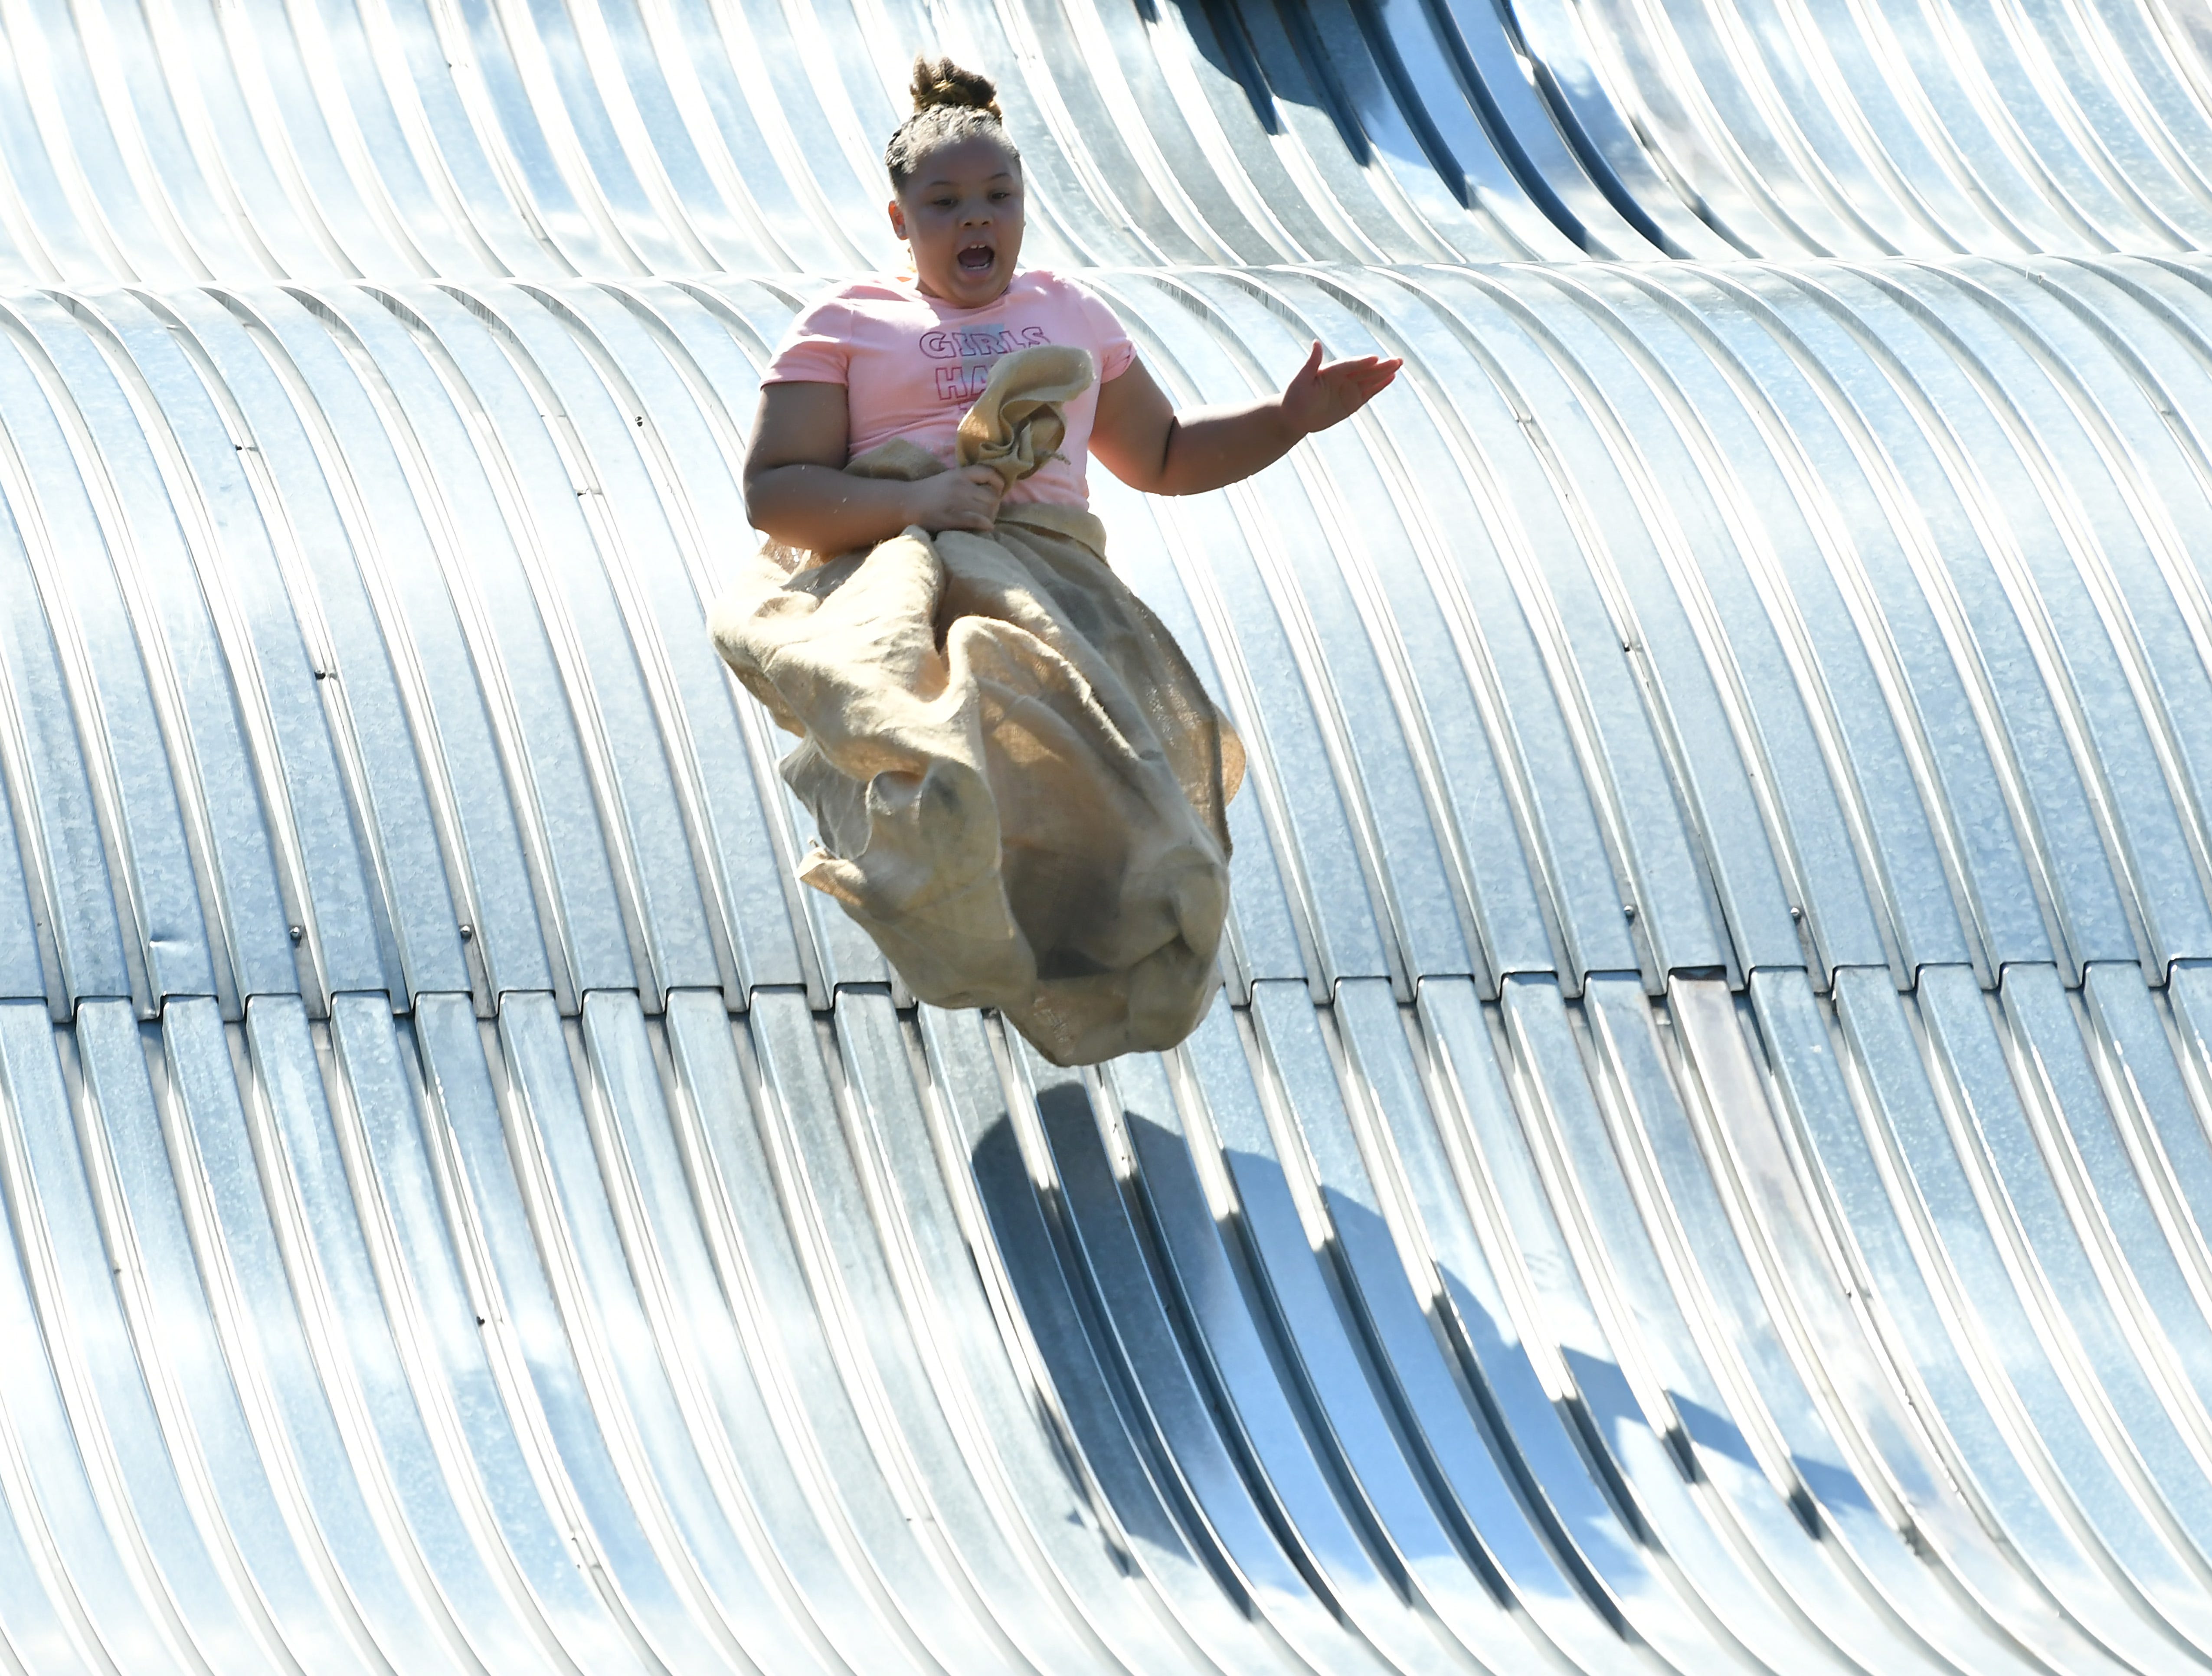 Kasey Chapple, 9, of Warren is airborne going down the giant slide on Belle Isle in Detroit on Aug. 19, 2022.